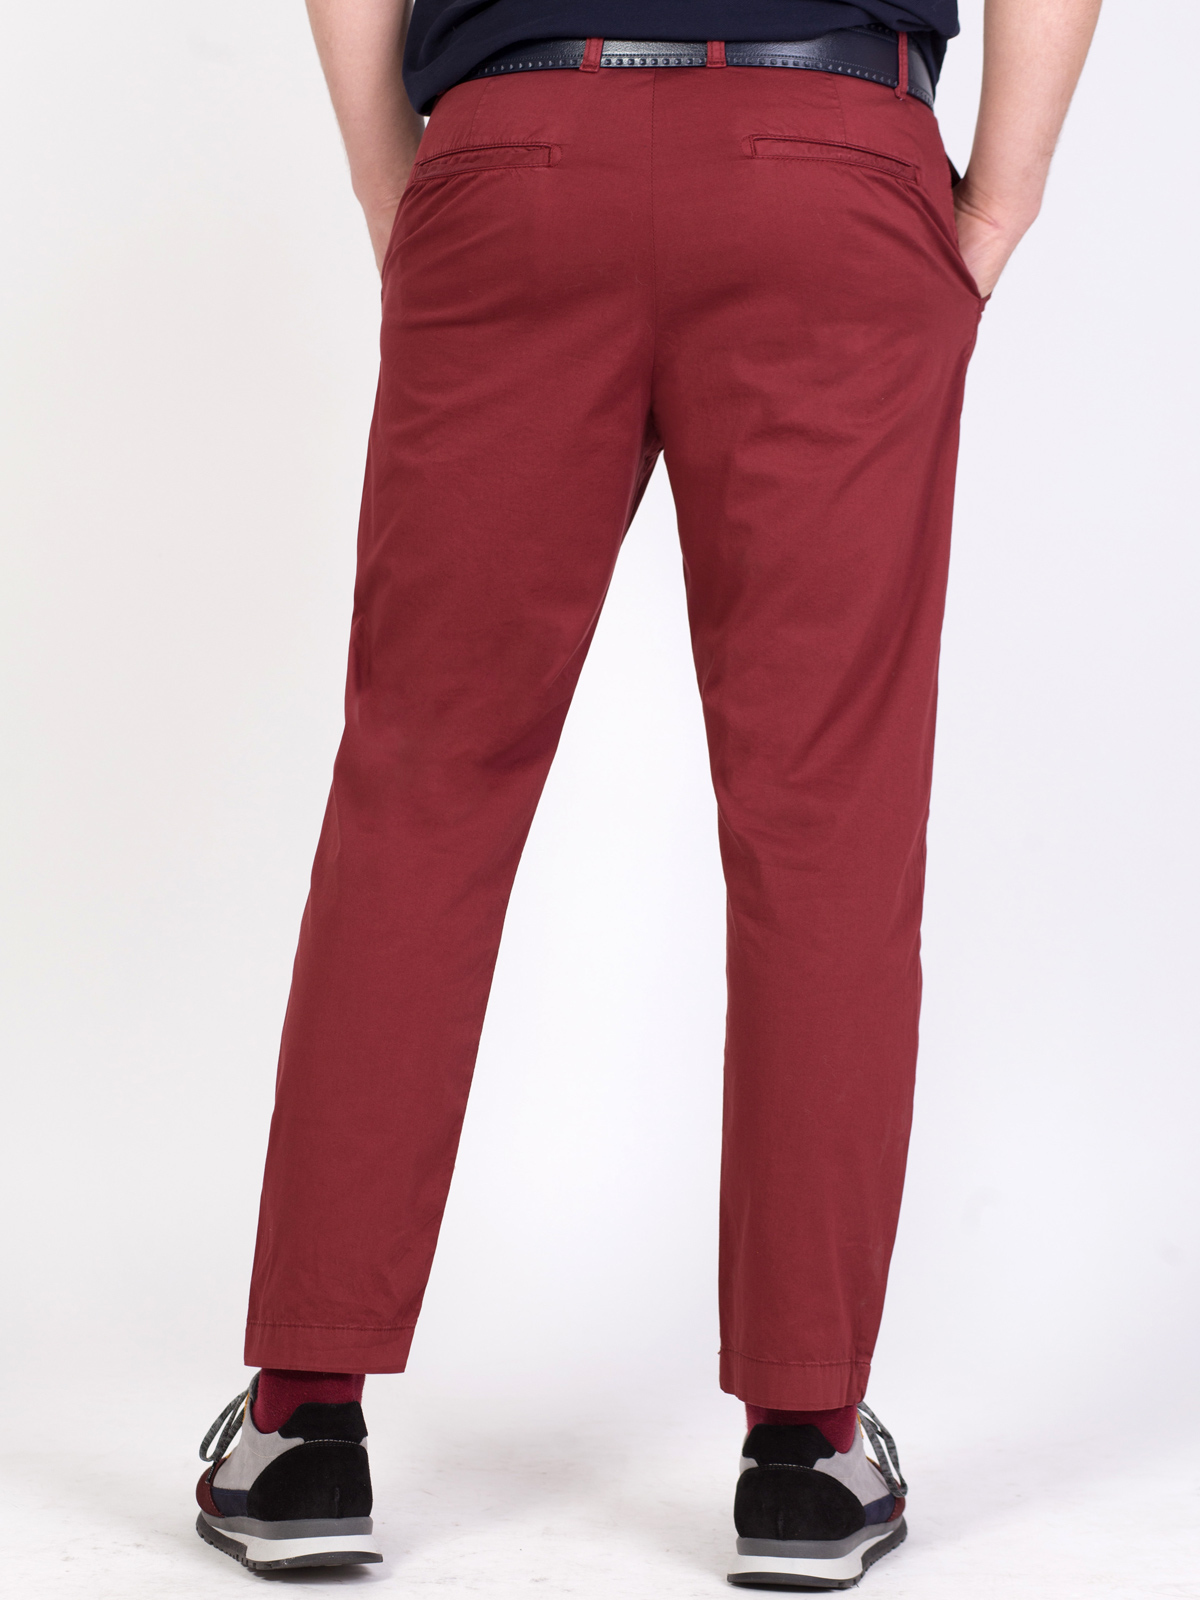 Pants in burgundy with a straight silho - 63308 € 24.75 img3